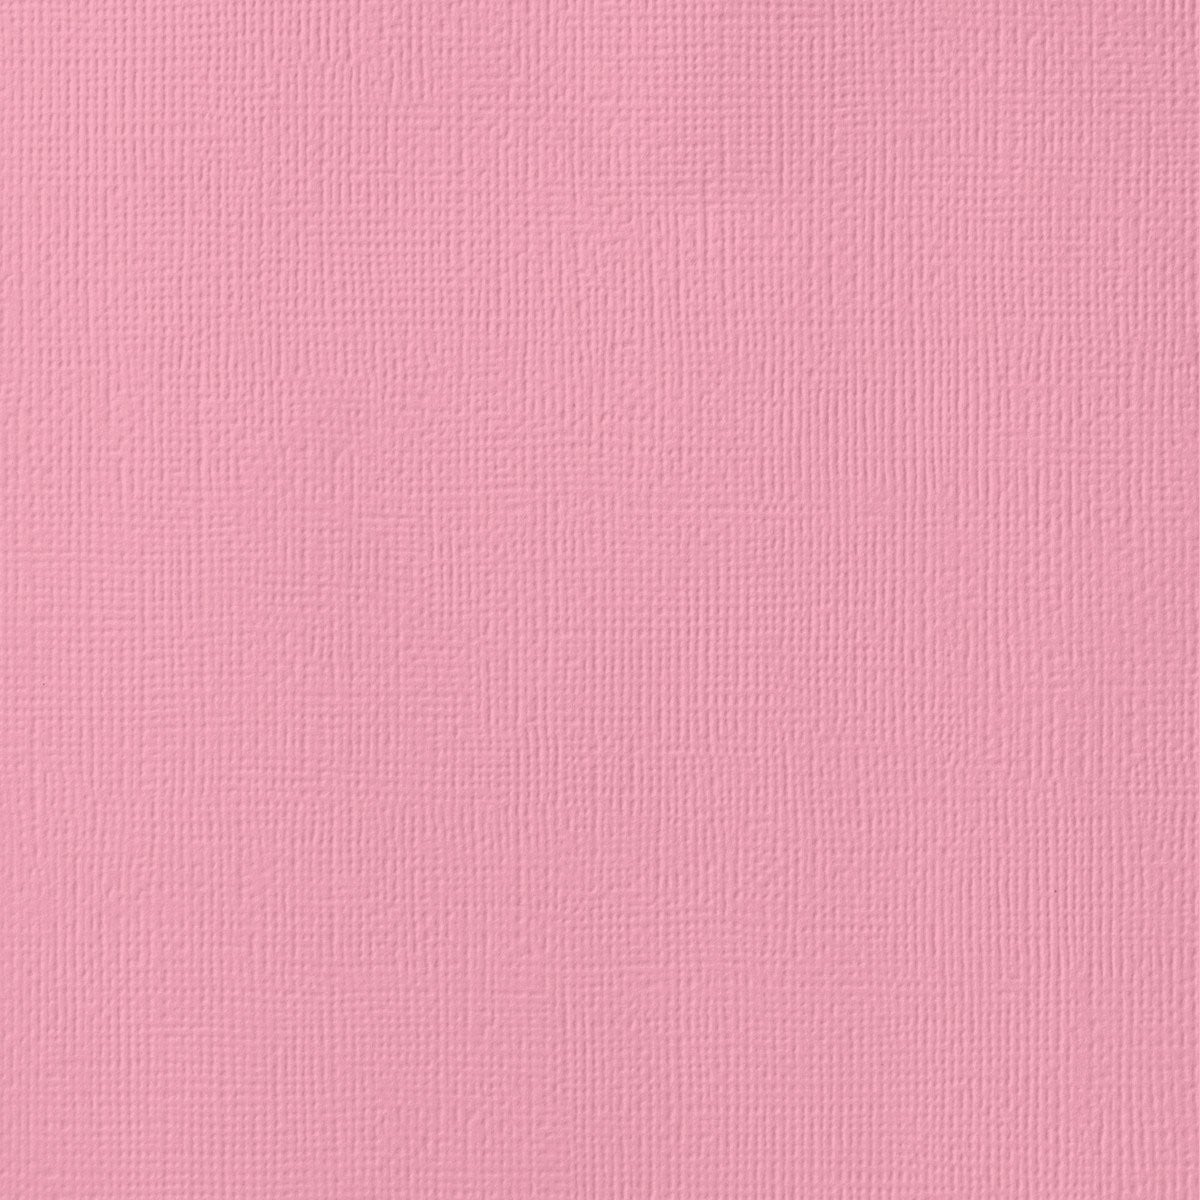 Bazzill CHABLIS 12x12 Textured Cardstock | 80 lb Pink Scrapbook Paper |  Premium Card Making and Paper Crafting Supplies | 25 Sheets per Pack